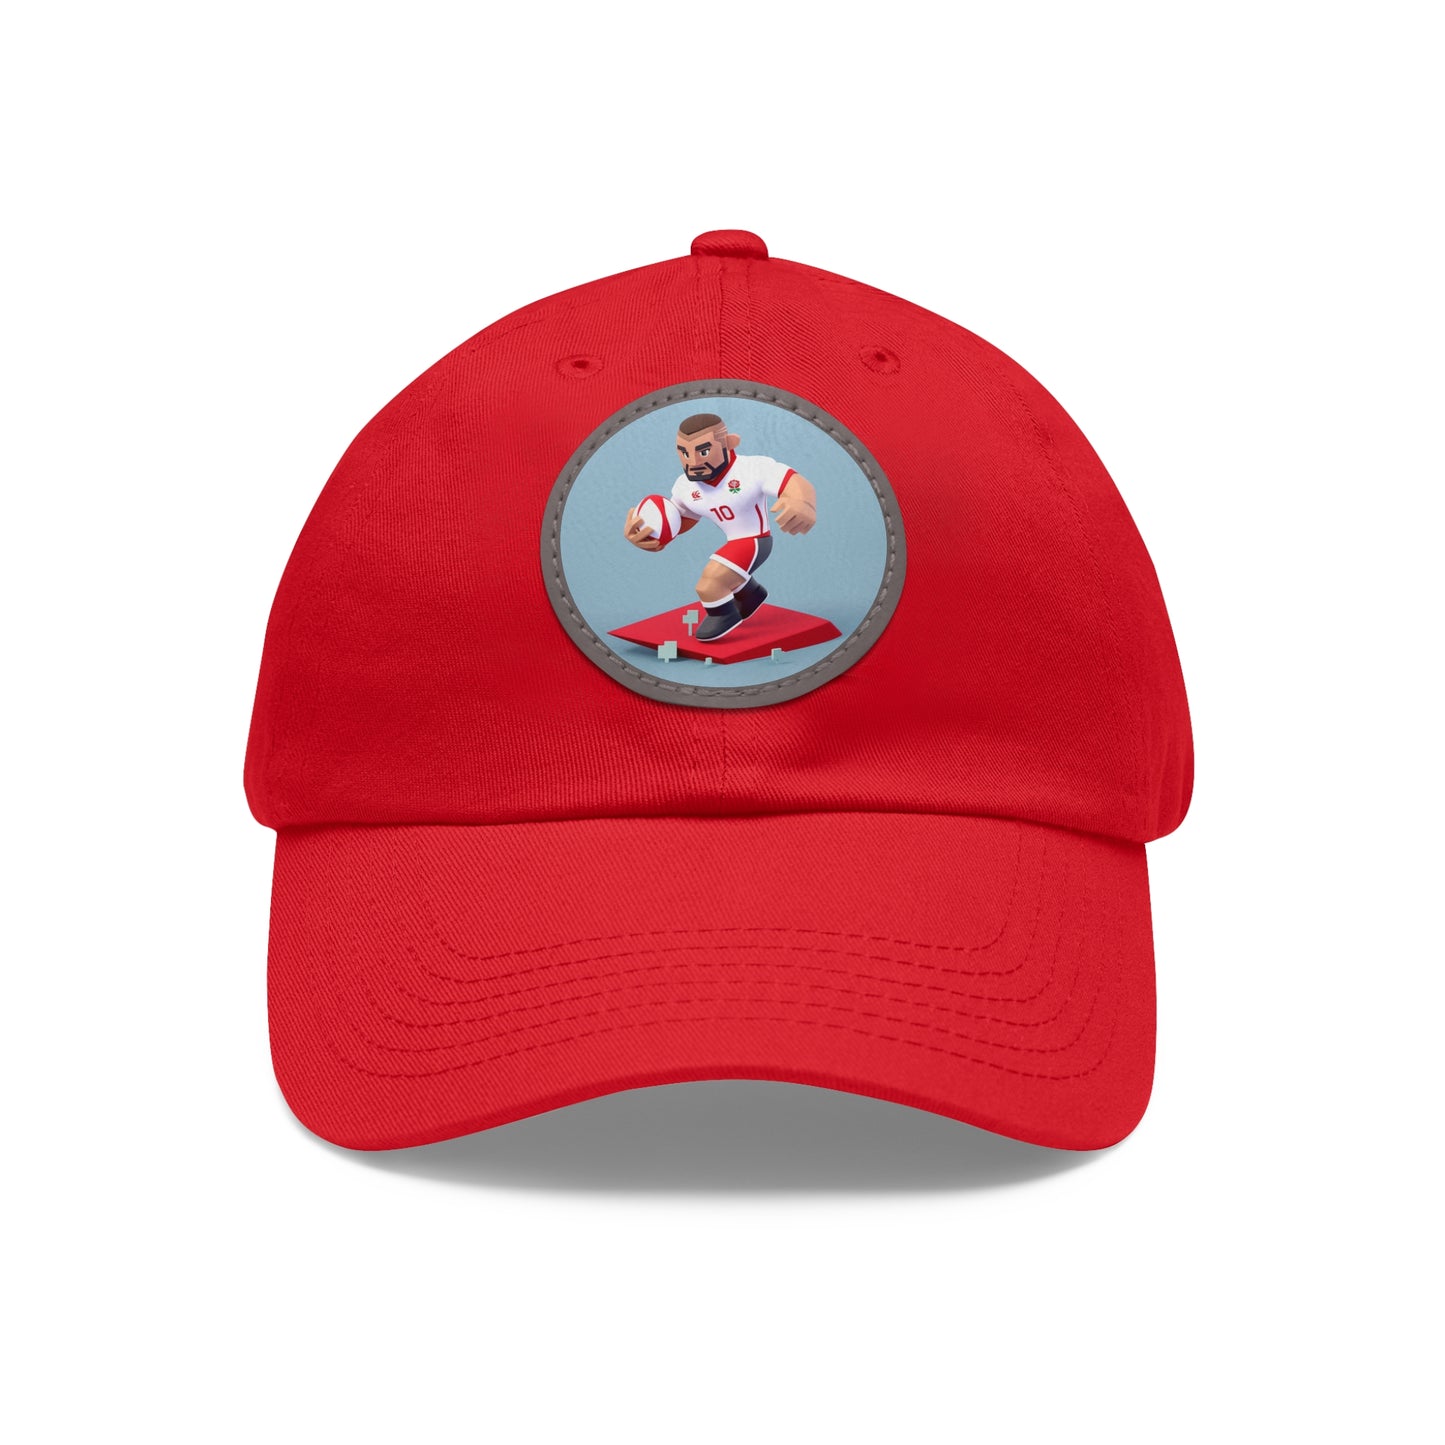 England Action Hat